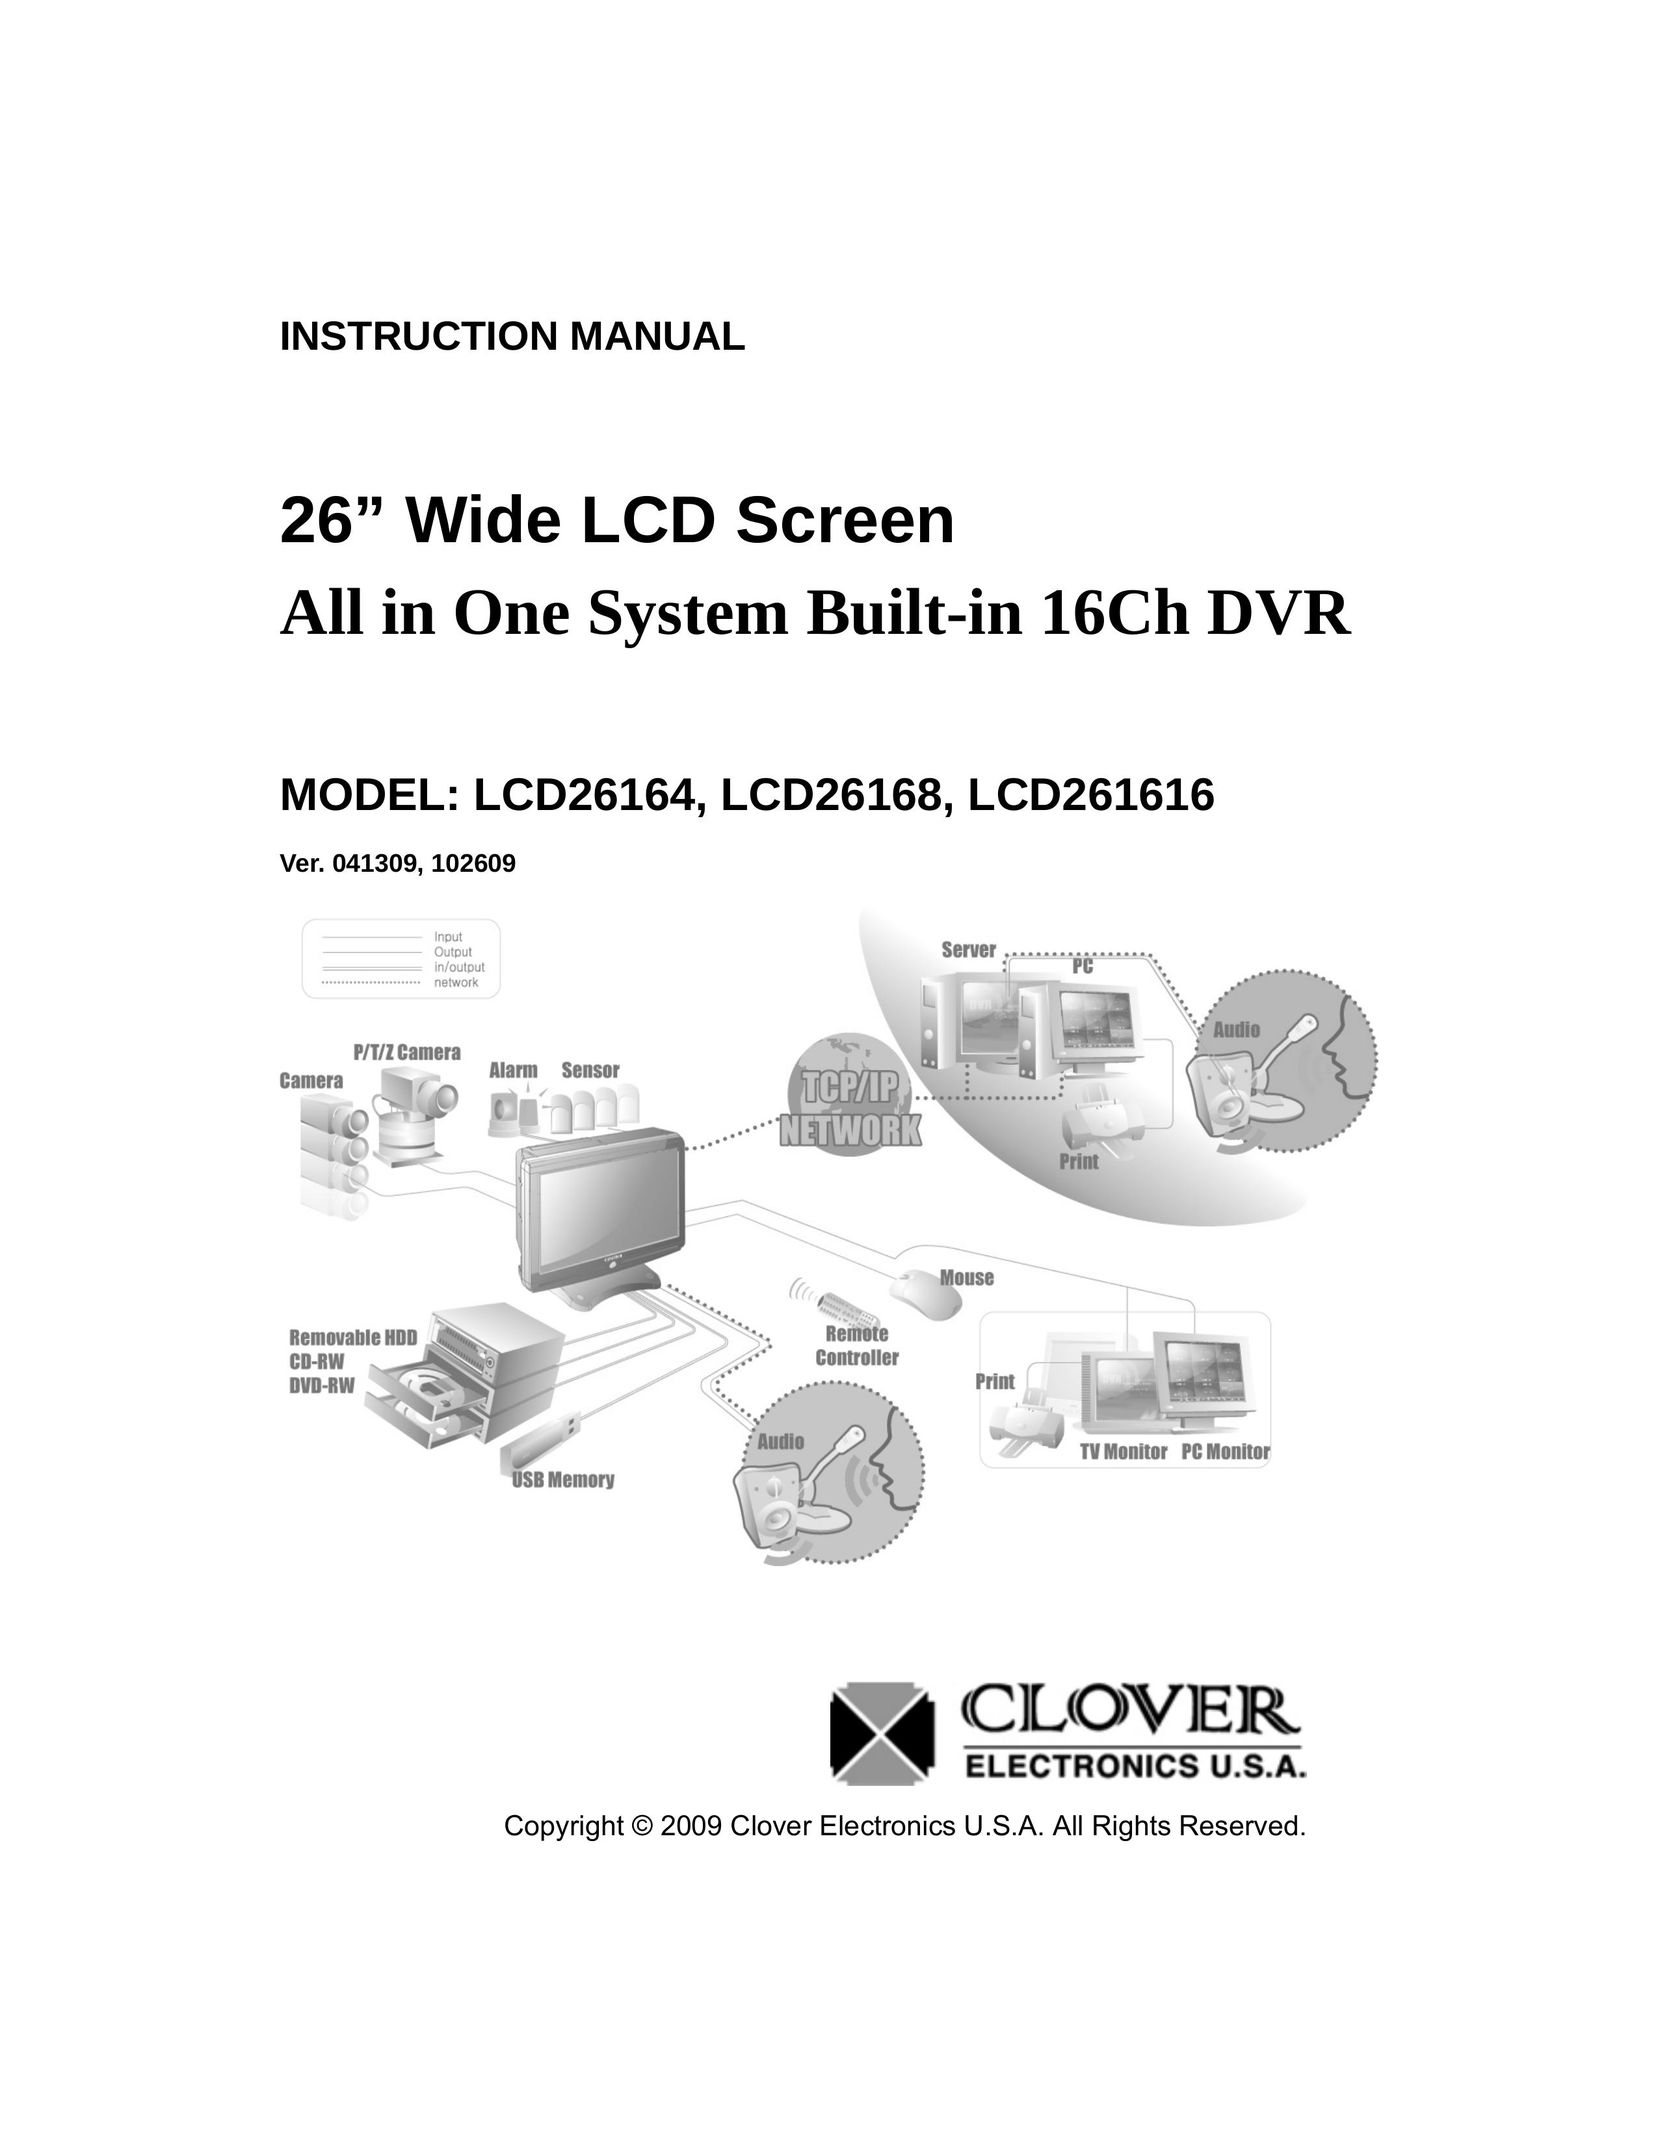 Clover Electronics LCD261616 Computer Monitor User Manual